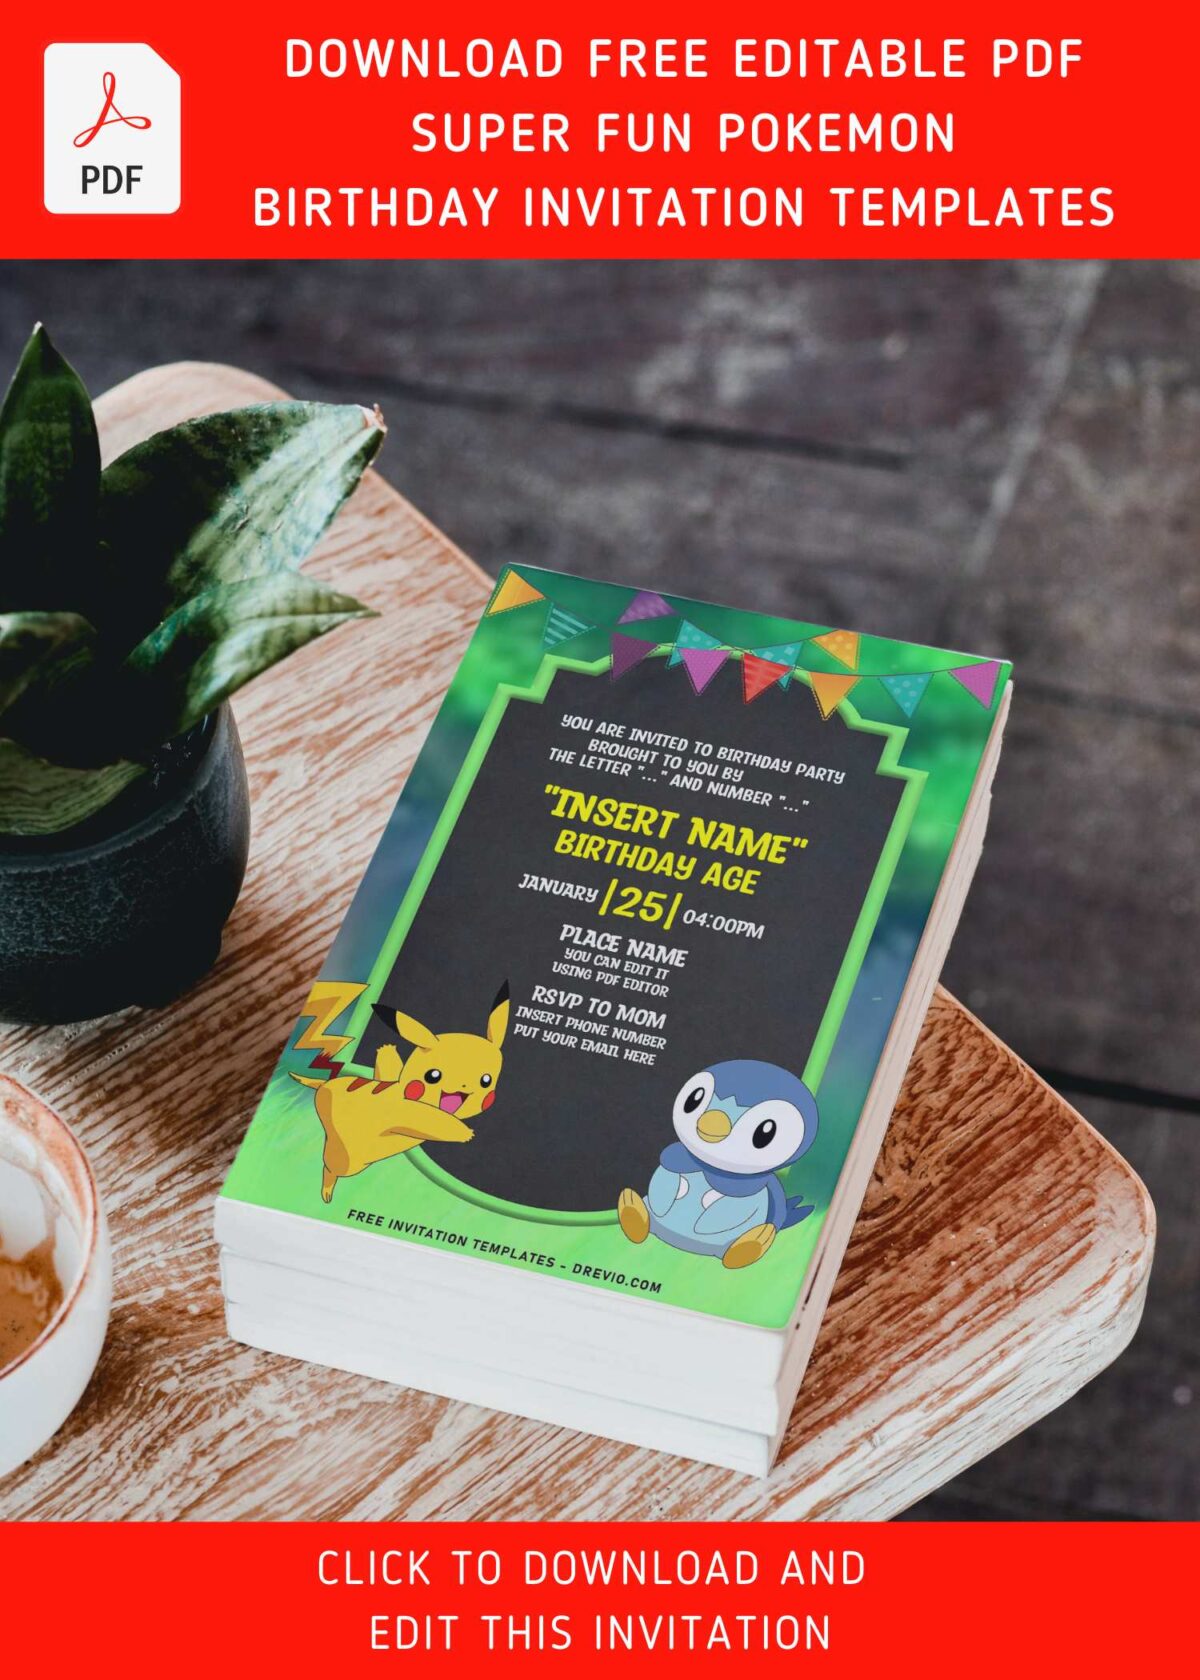 (Free Editable PDF) Hilarious Pikachu And Friends Pokémon Birthday Invitation Templates with adorable baby penguin Piplup